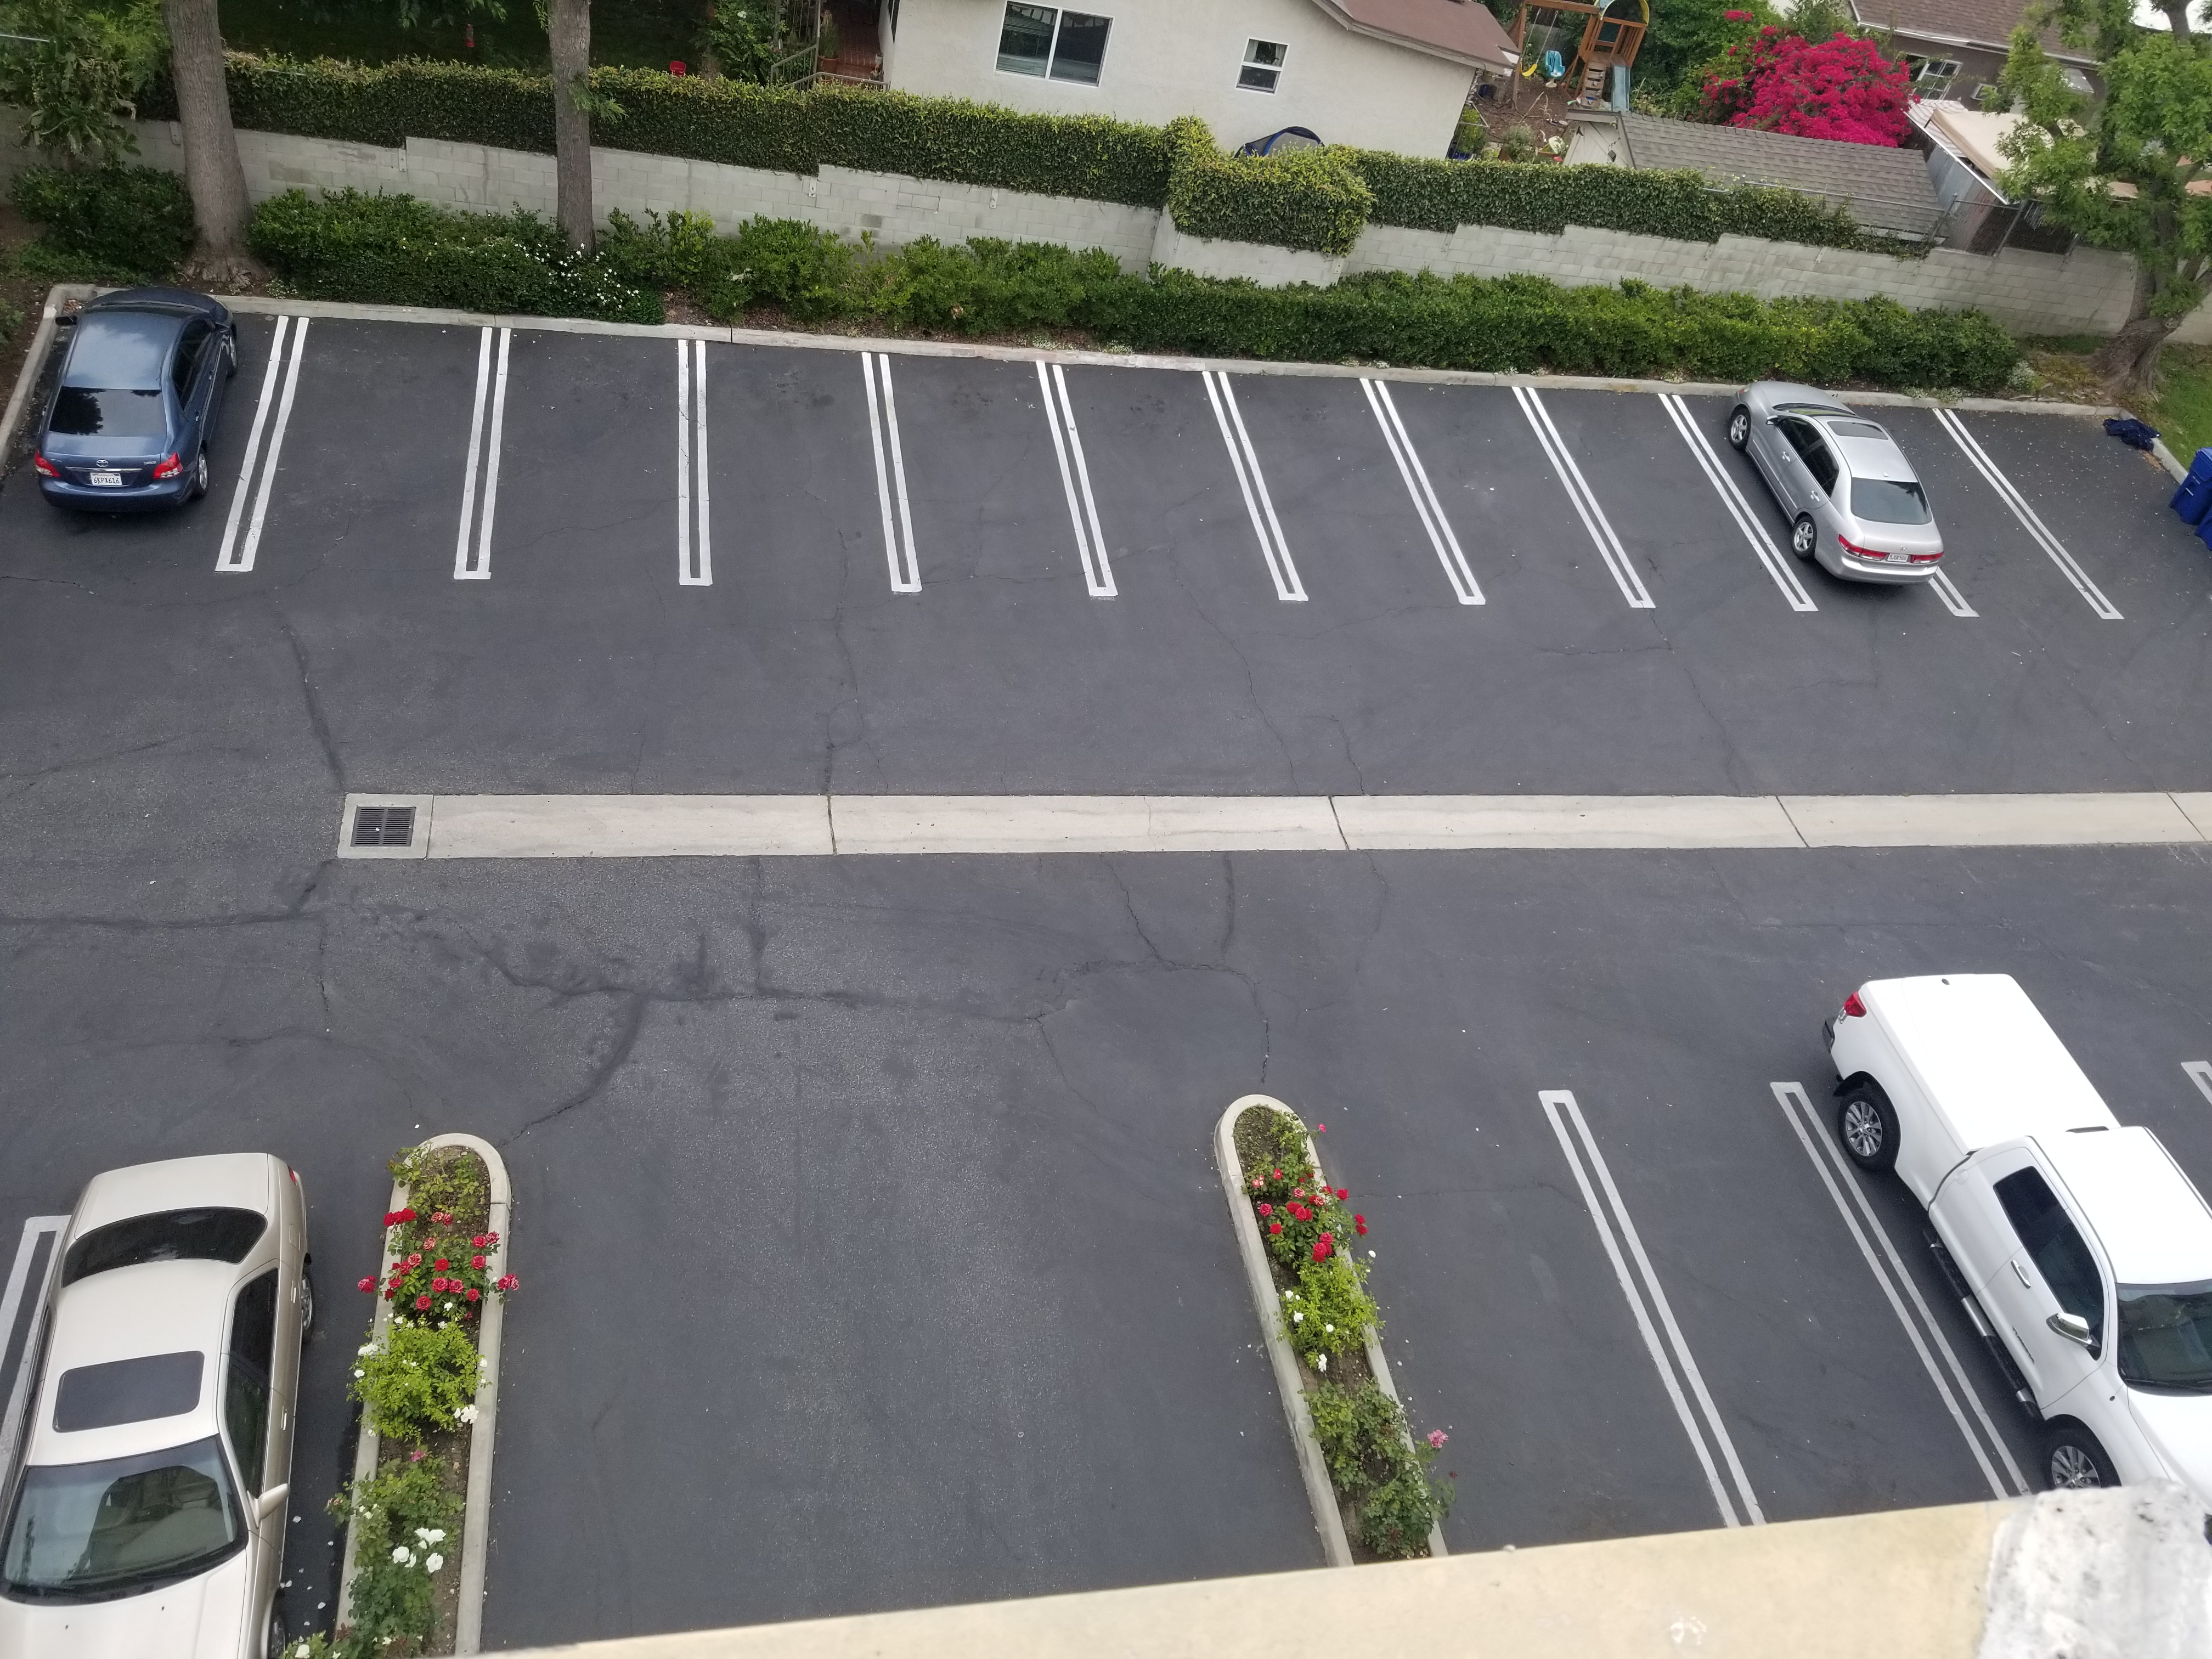 Image of the back parking area of the building